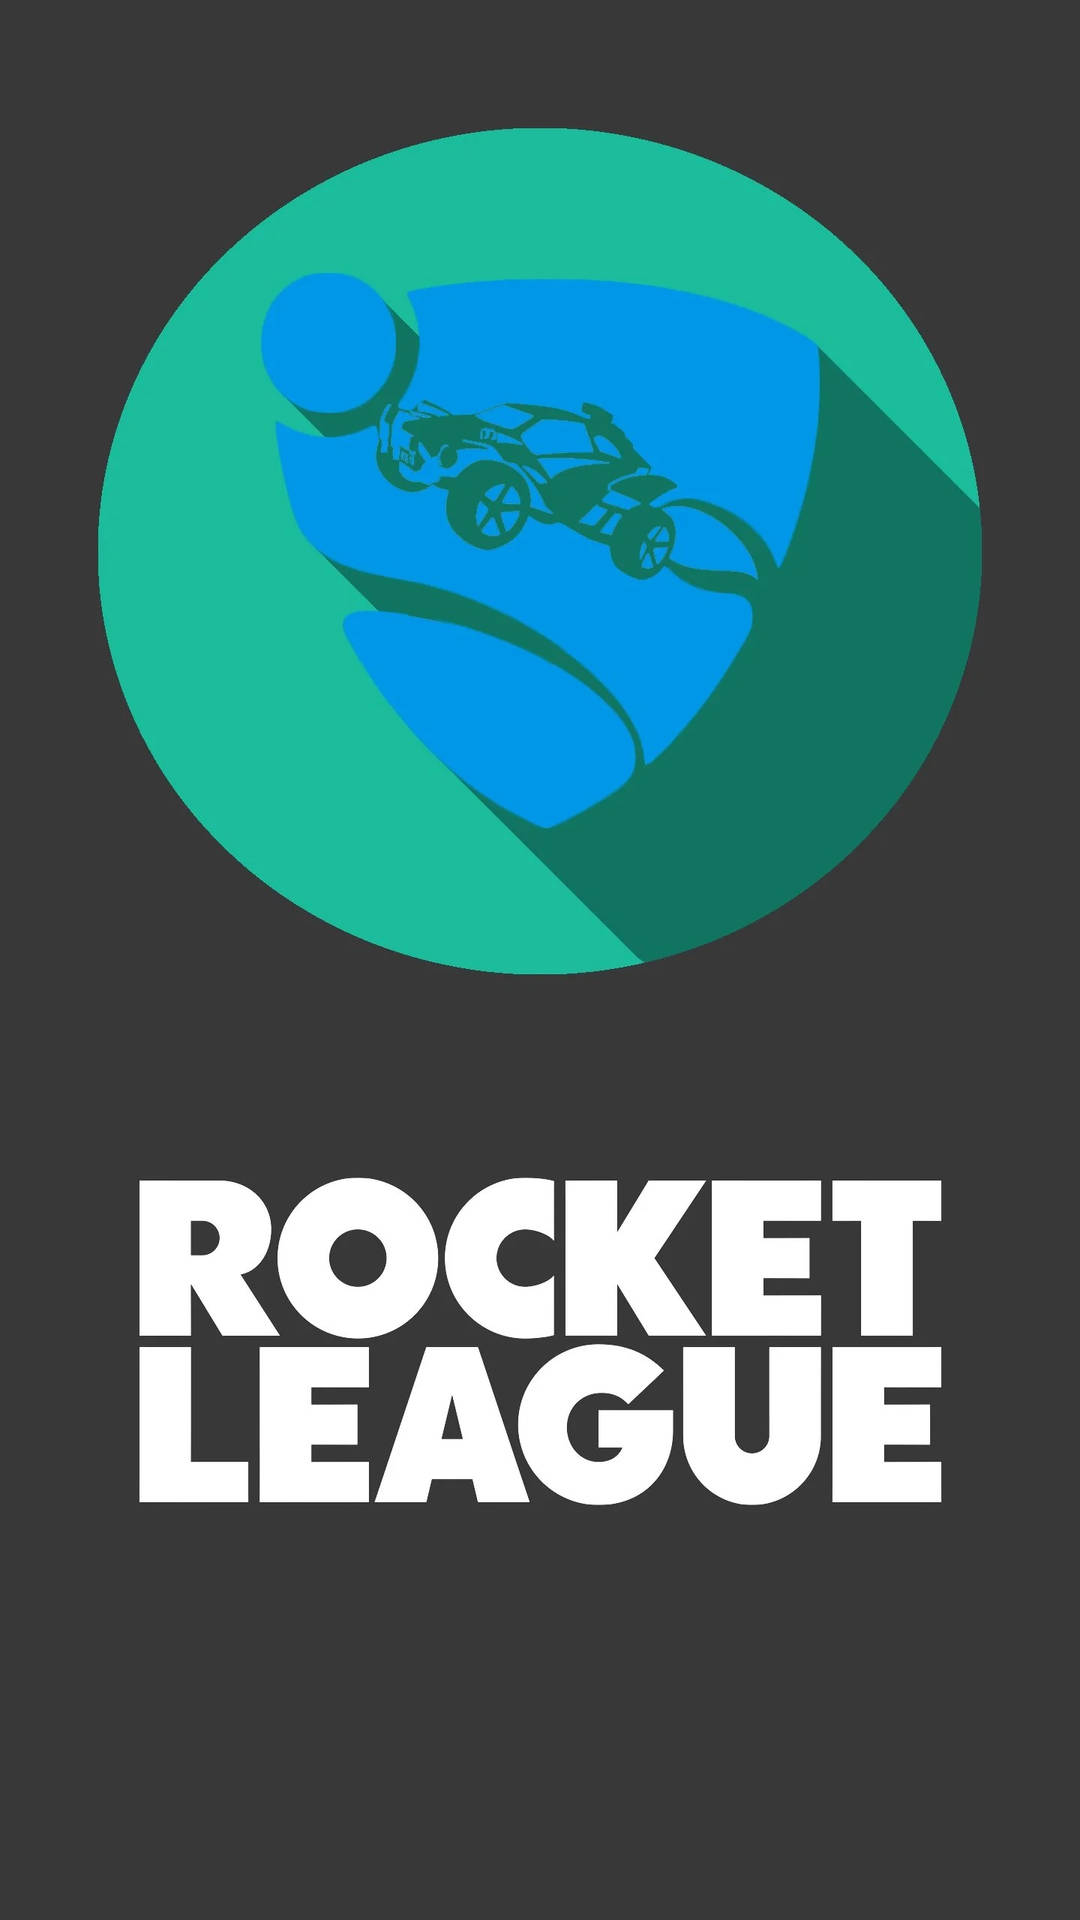 Don't Miss A Moment Of Competitive Gaming With The Rocket League Phone! Background